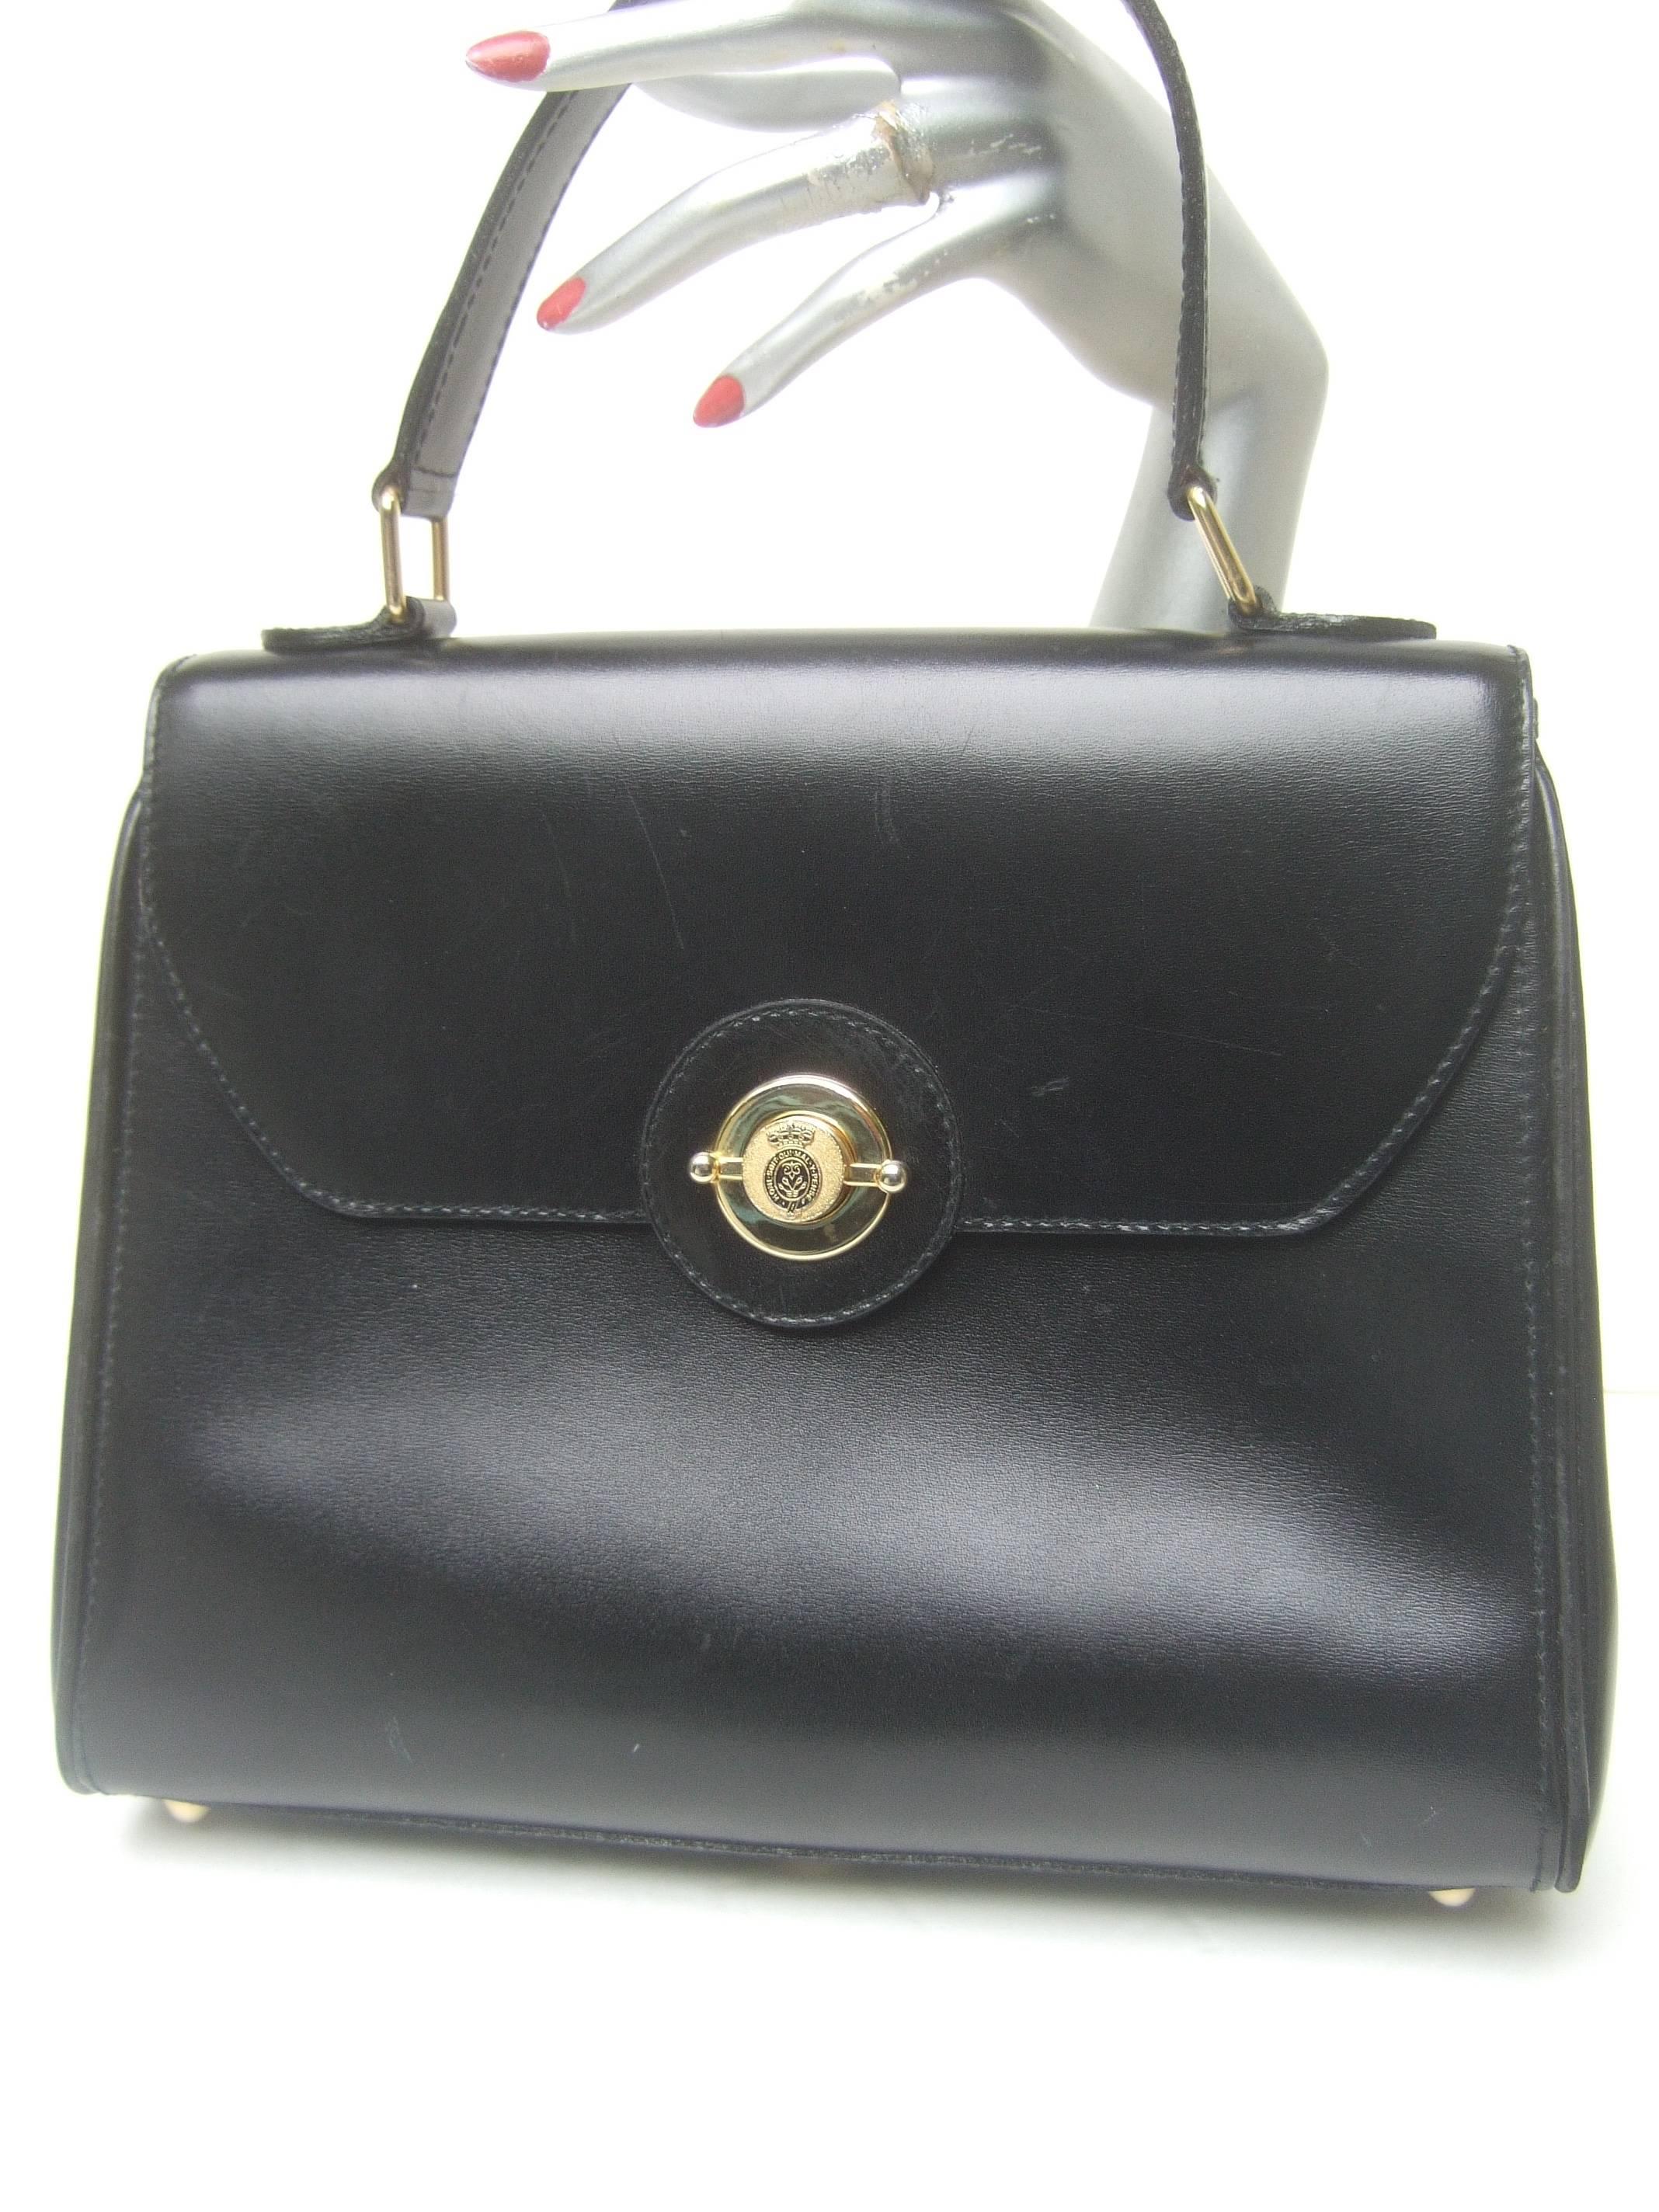 Women's Saks Fifth Avenue Ebony Leather Handbag Made in Italy  For Sale